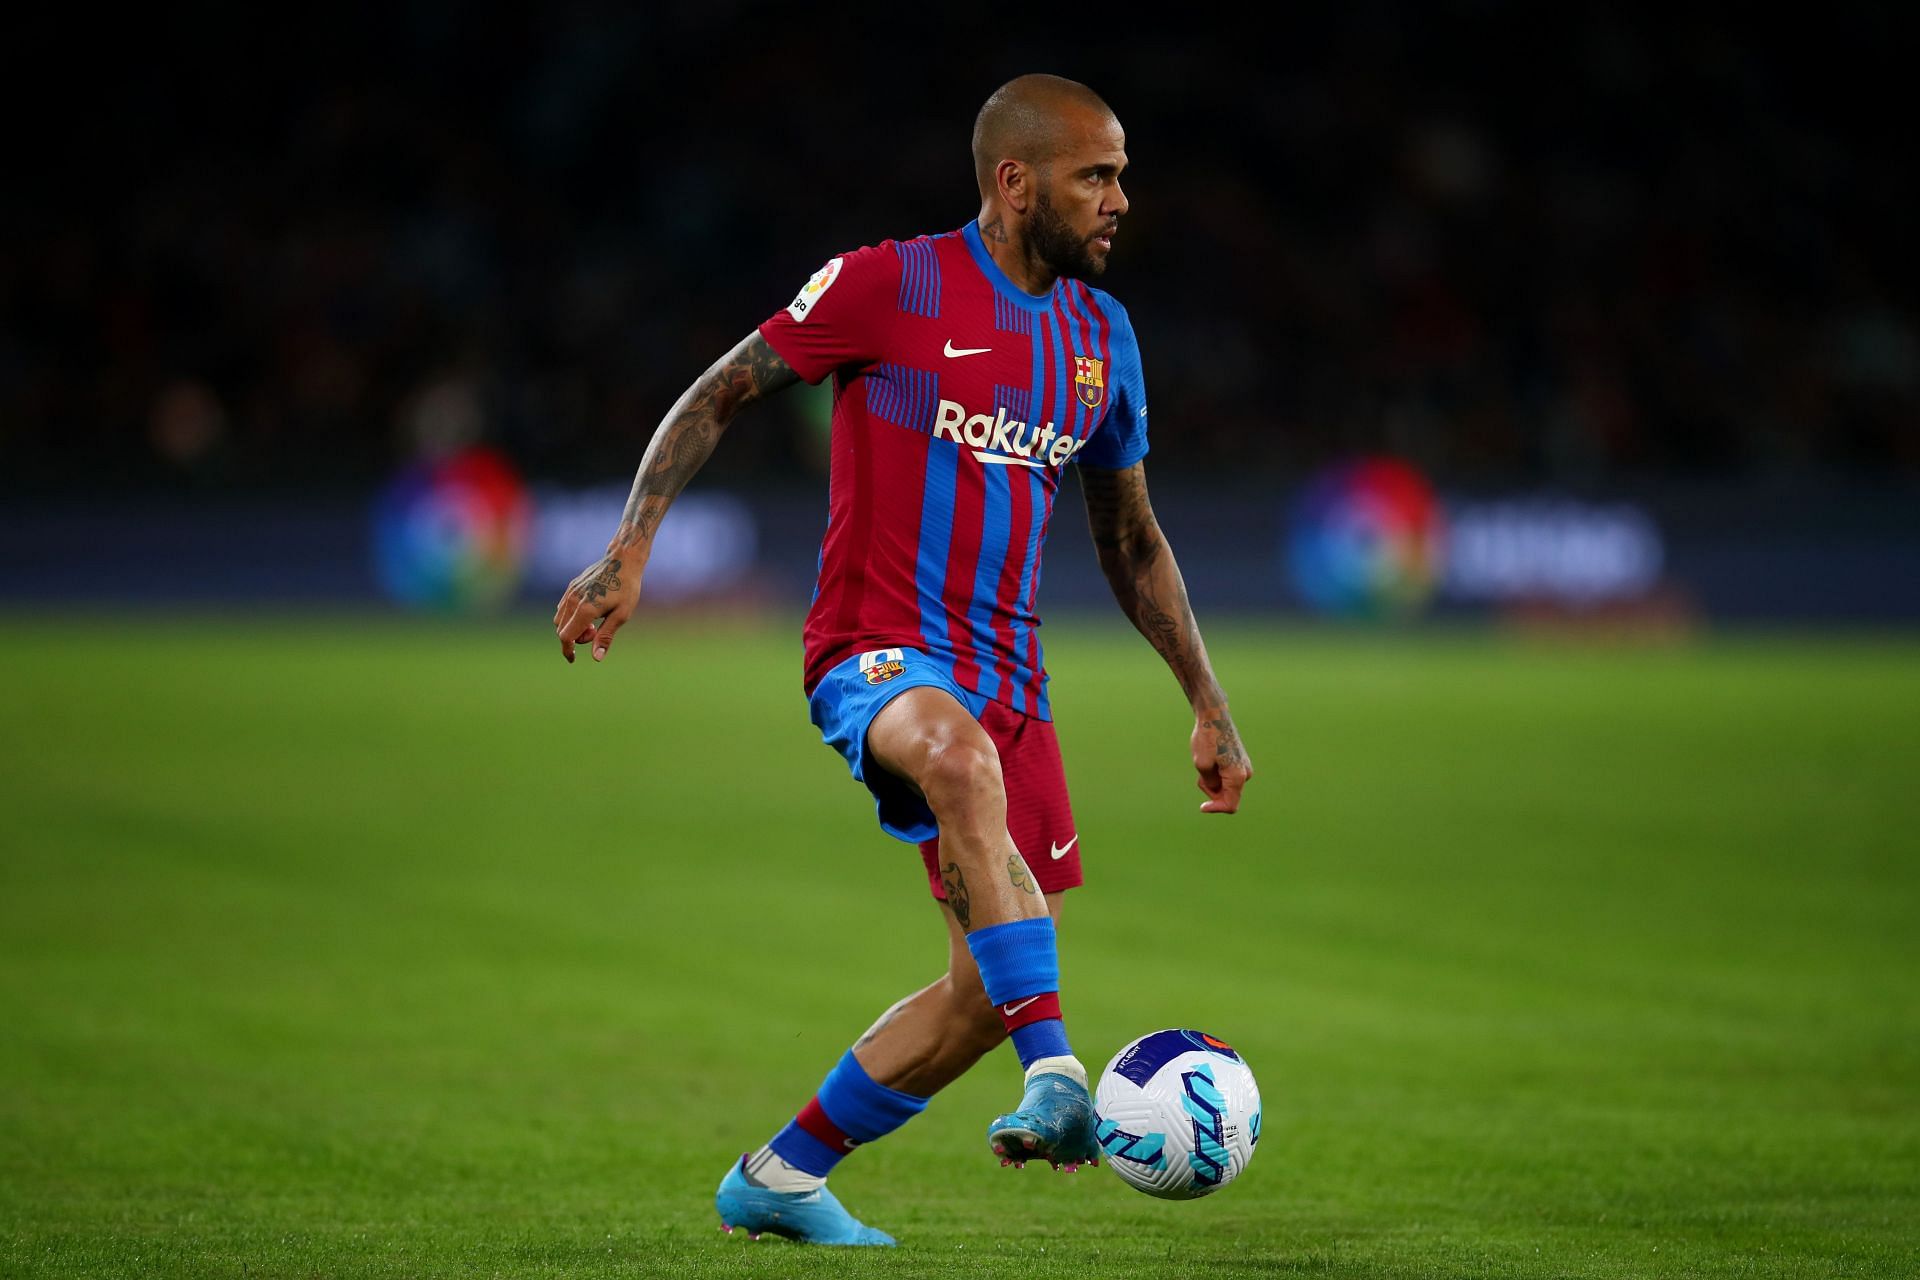 Ex-Barcelona star Dani Alves planning on return to football after being released on bail following conviction for rape - Reports